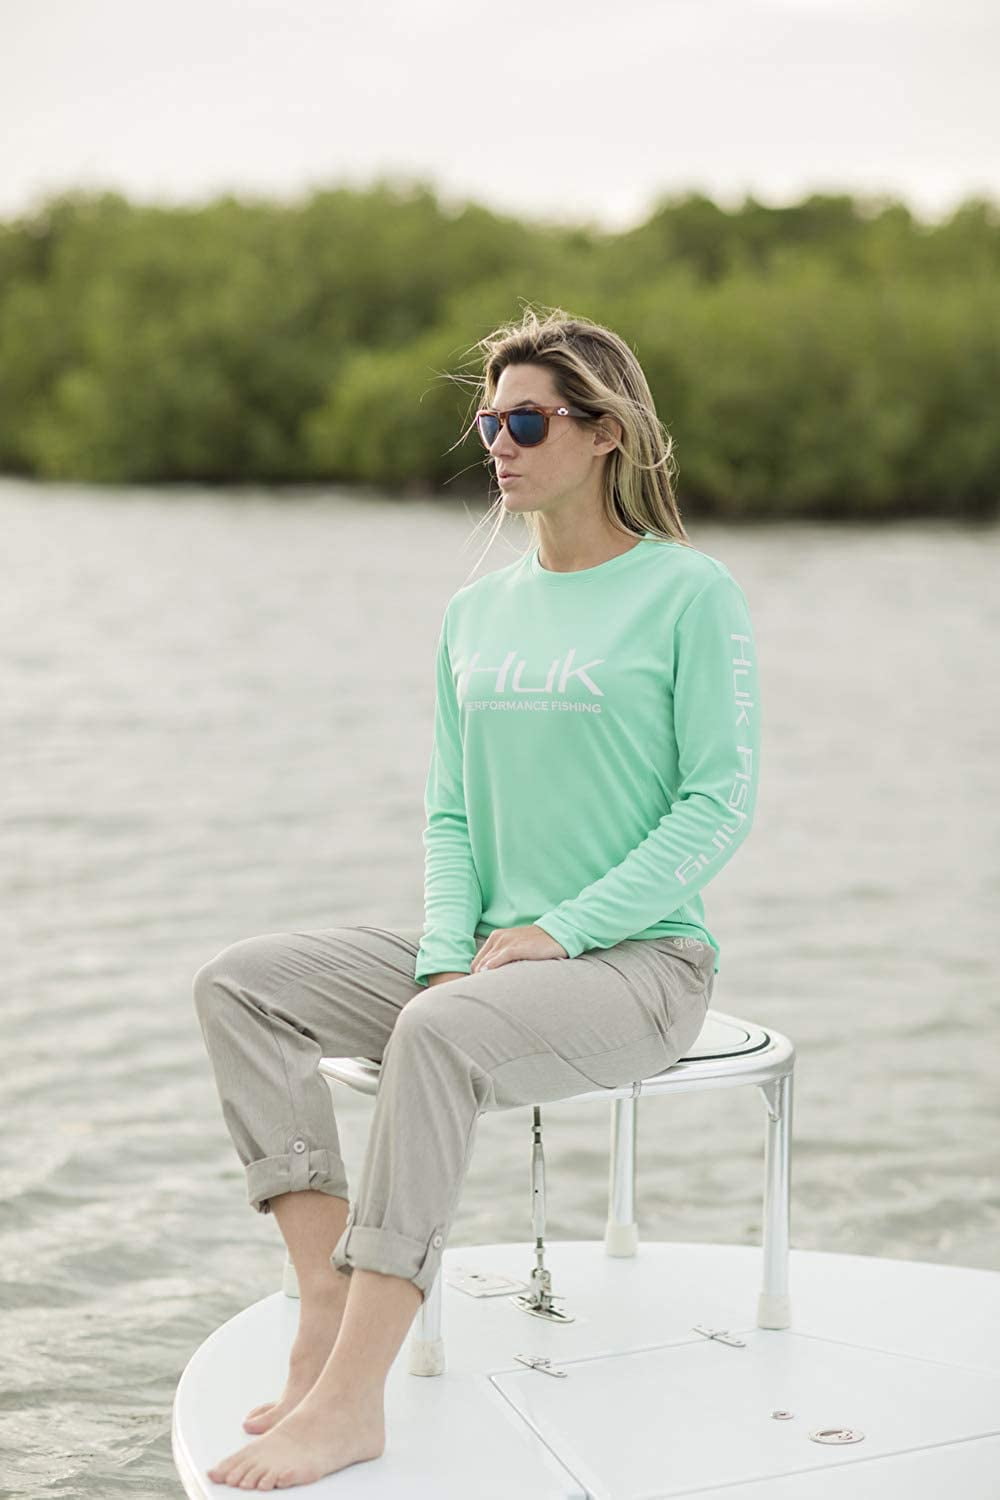 HUK Women's Icon X Long Sleeve Fishing Shirt with Sun Protection Electric  Green X-Small